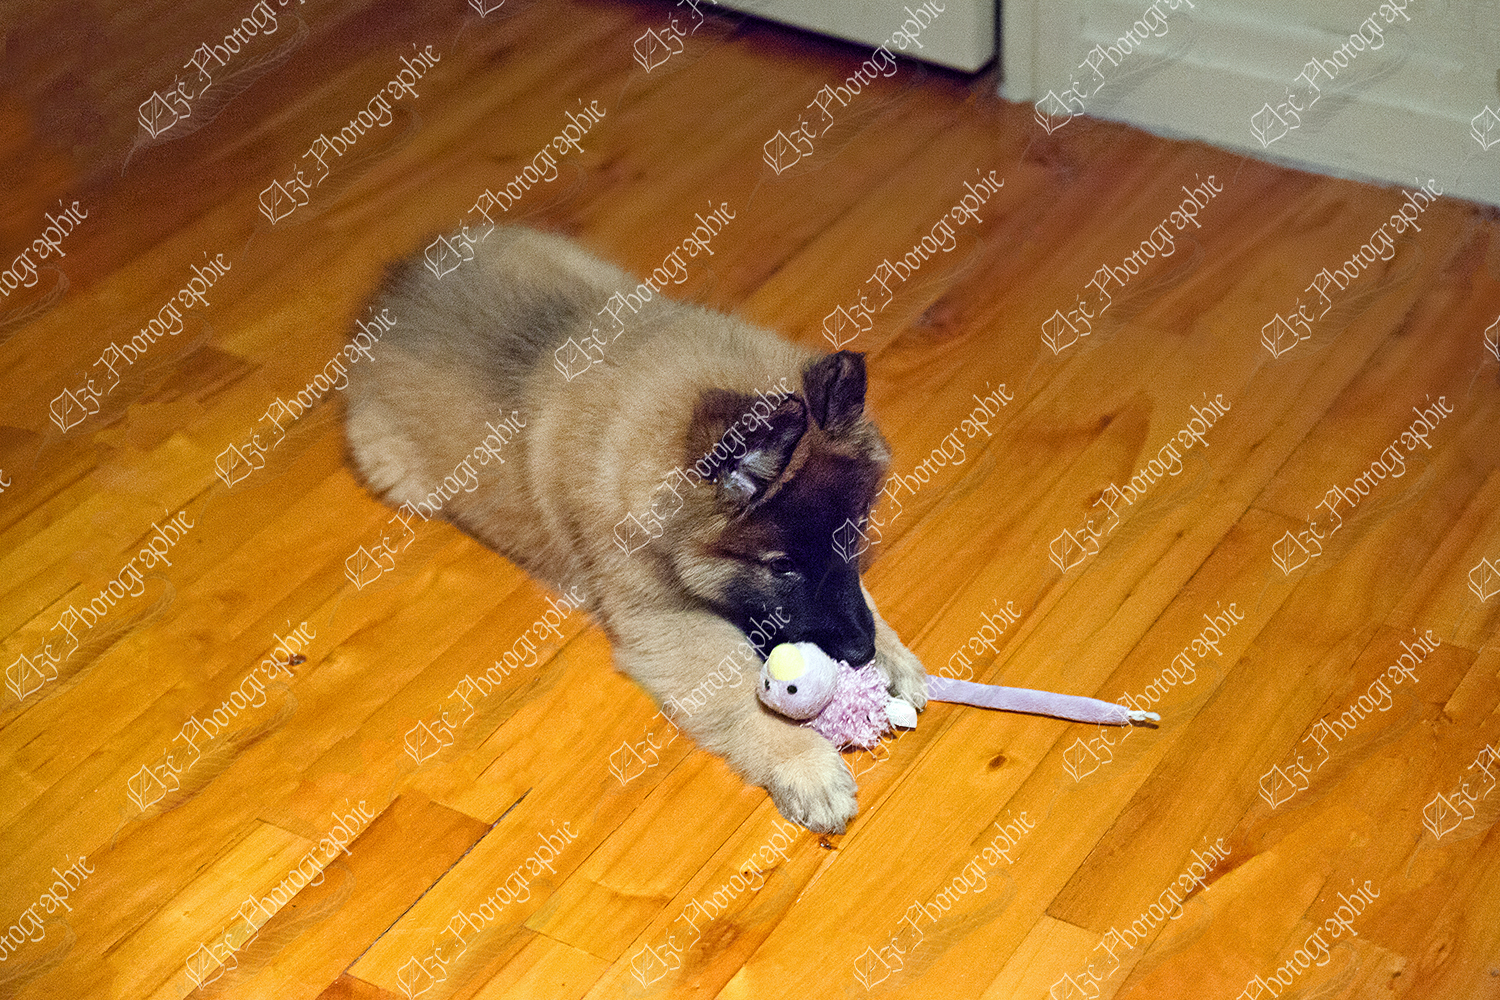 elze_photo_0067_chiot_jeu_chien_puppy_playing